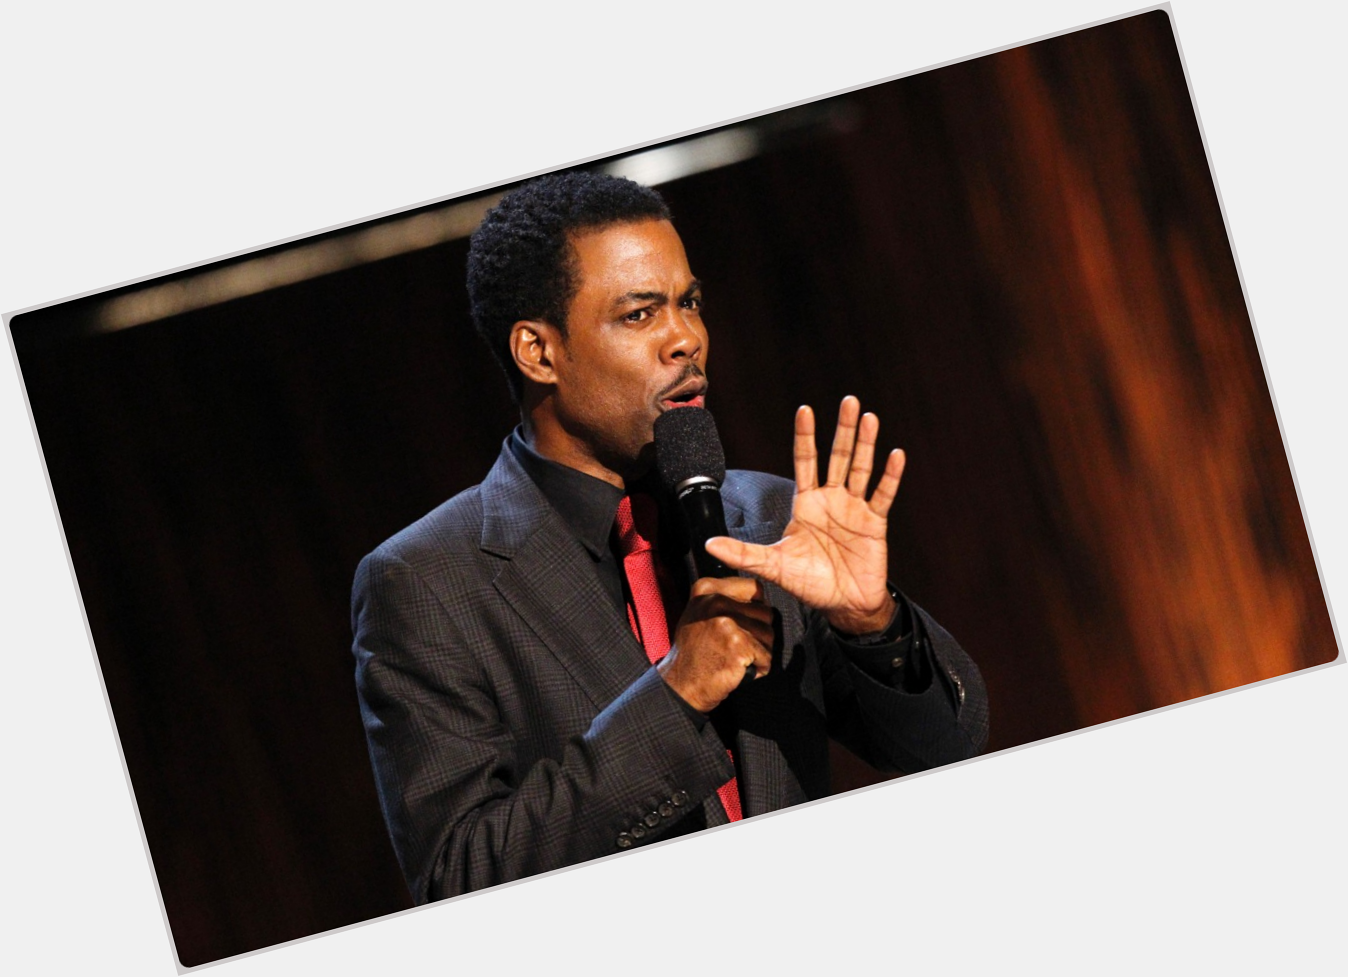 Happy Birthday to Chris Rock, who turns 50 today! 